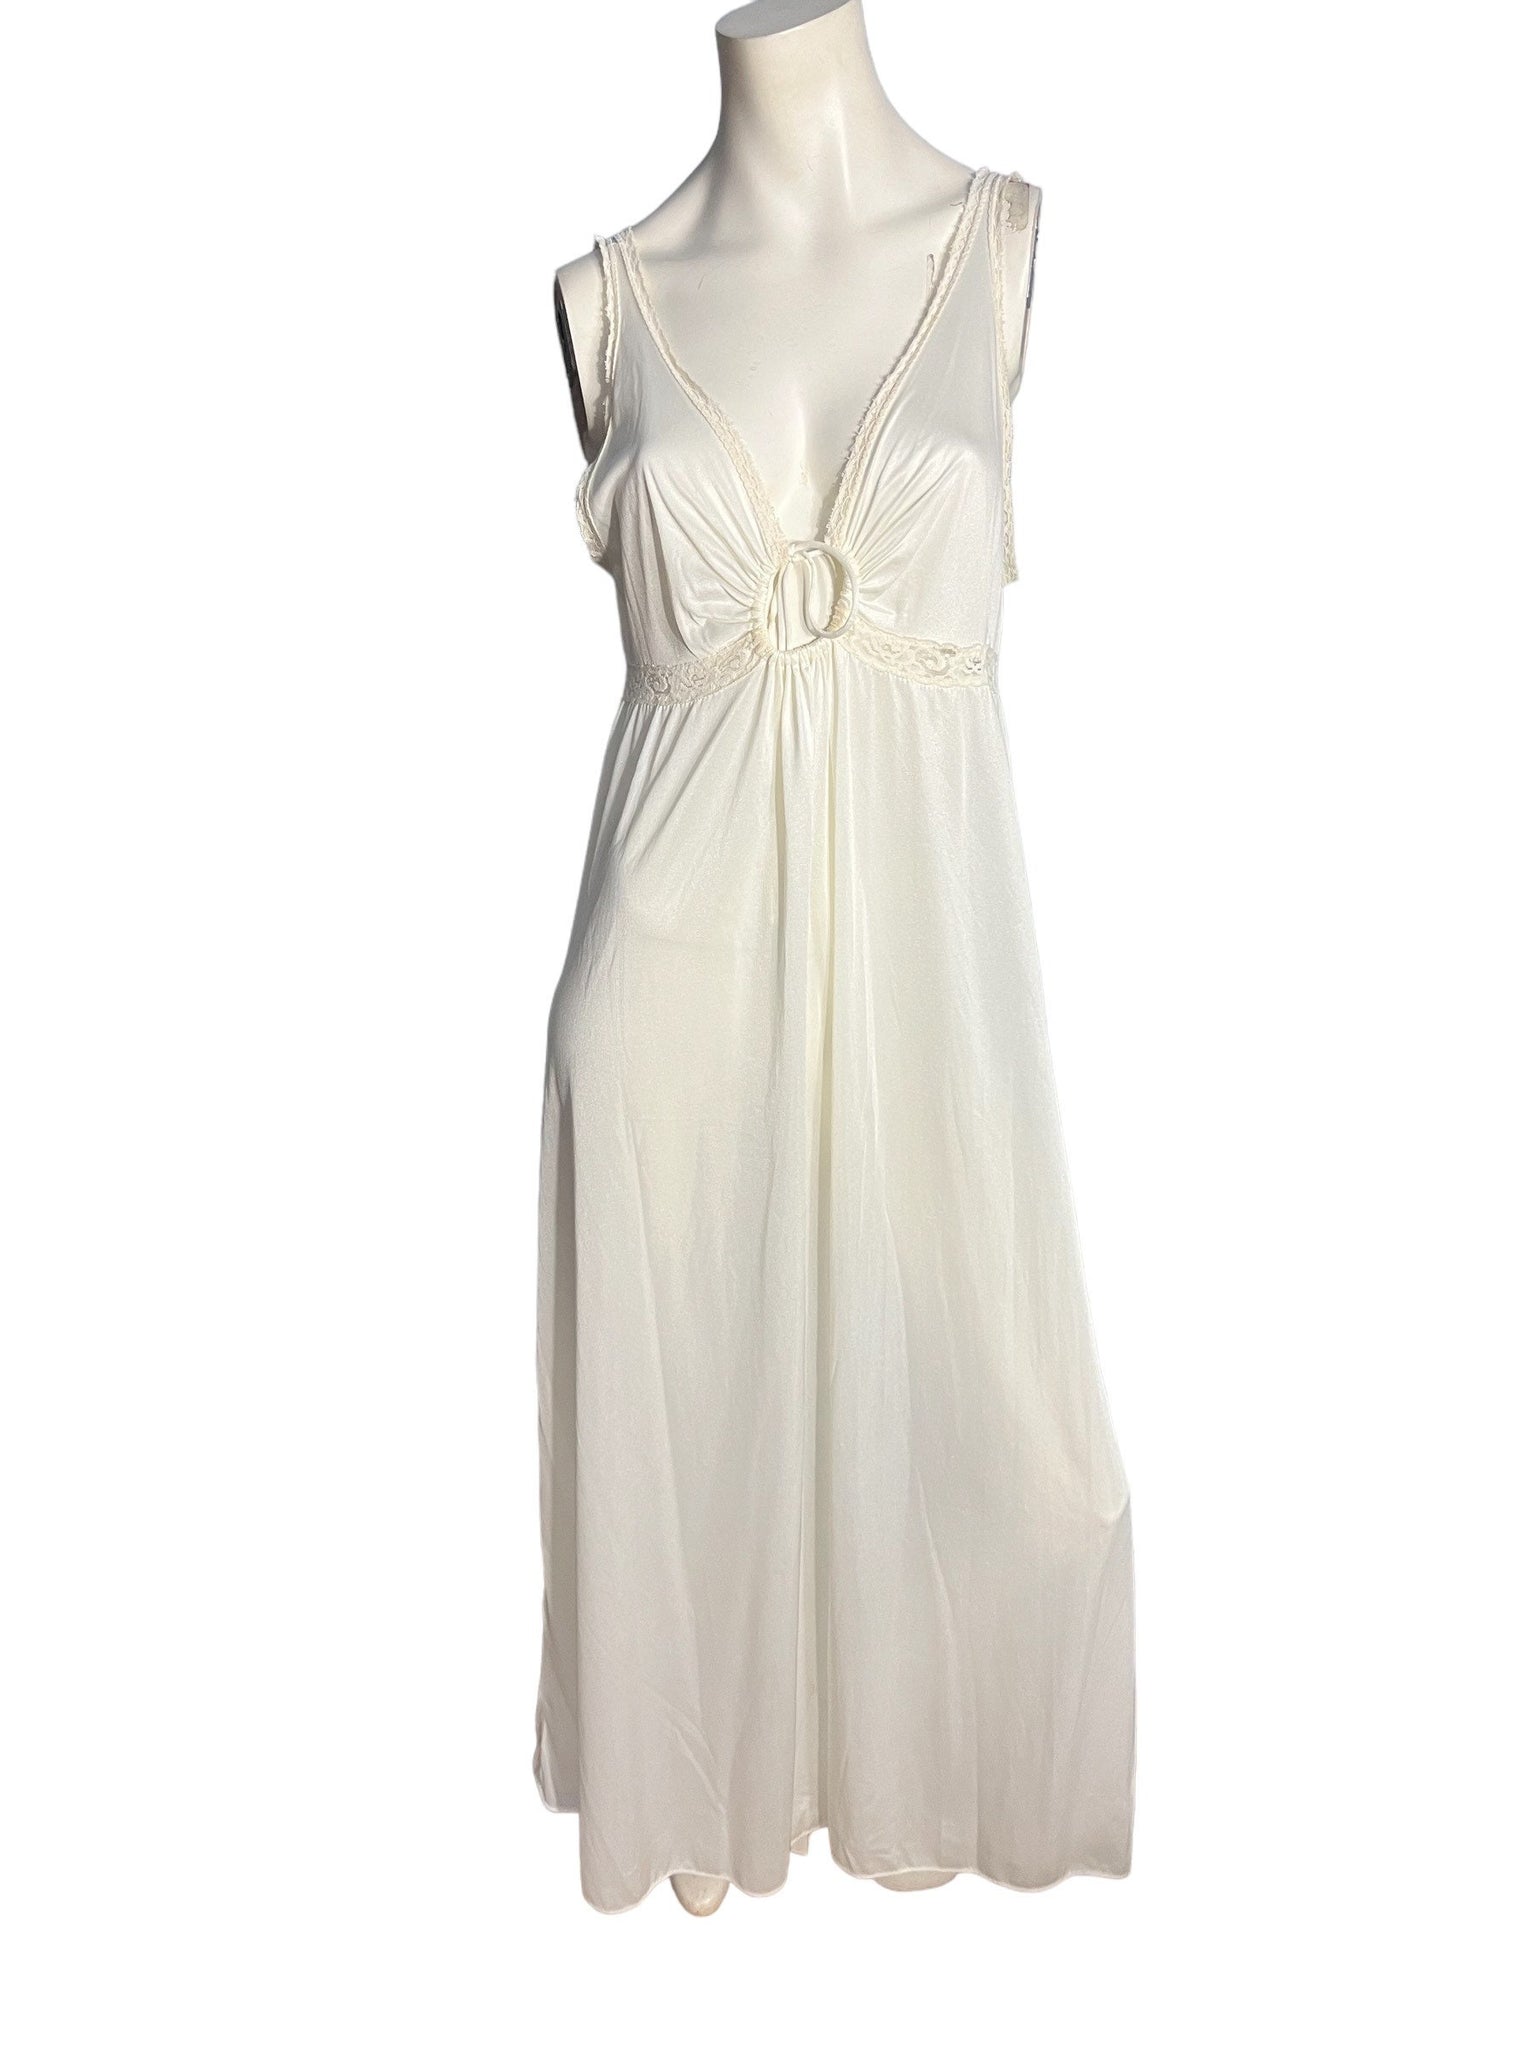 Vintage 70's white keyhole nightgown M Val Mode